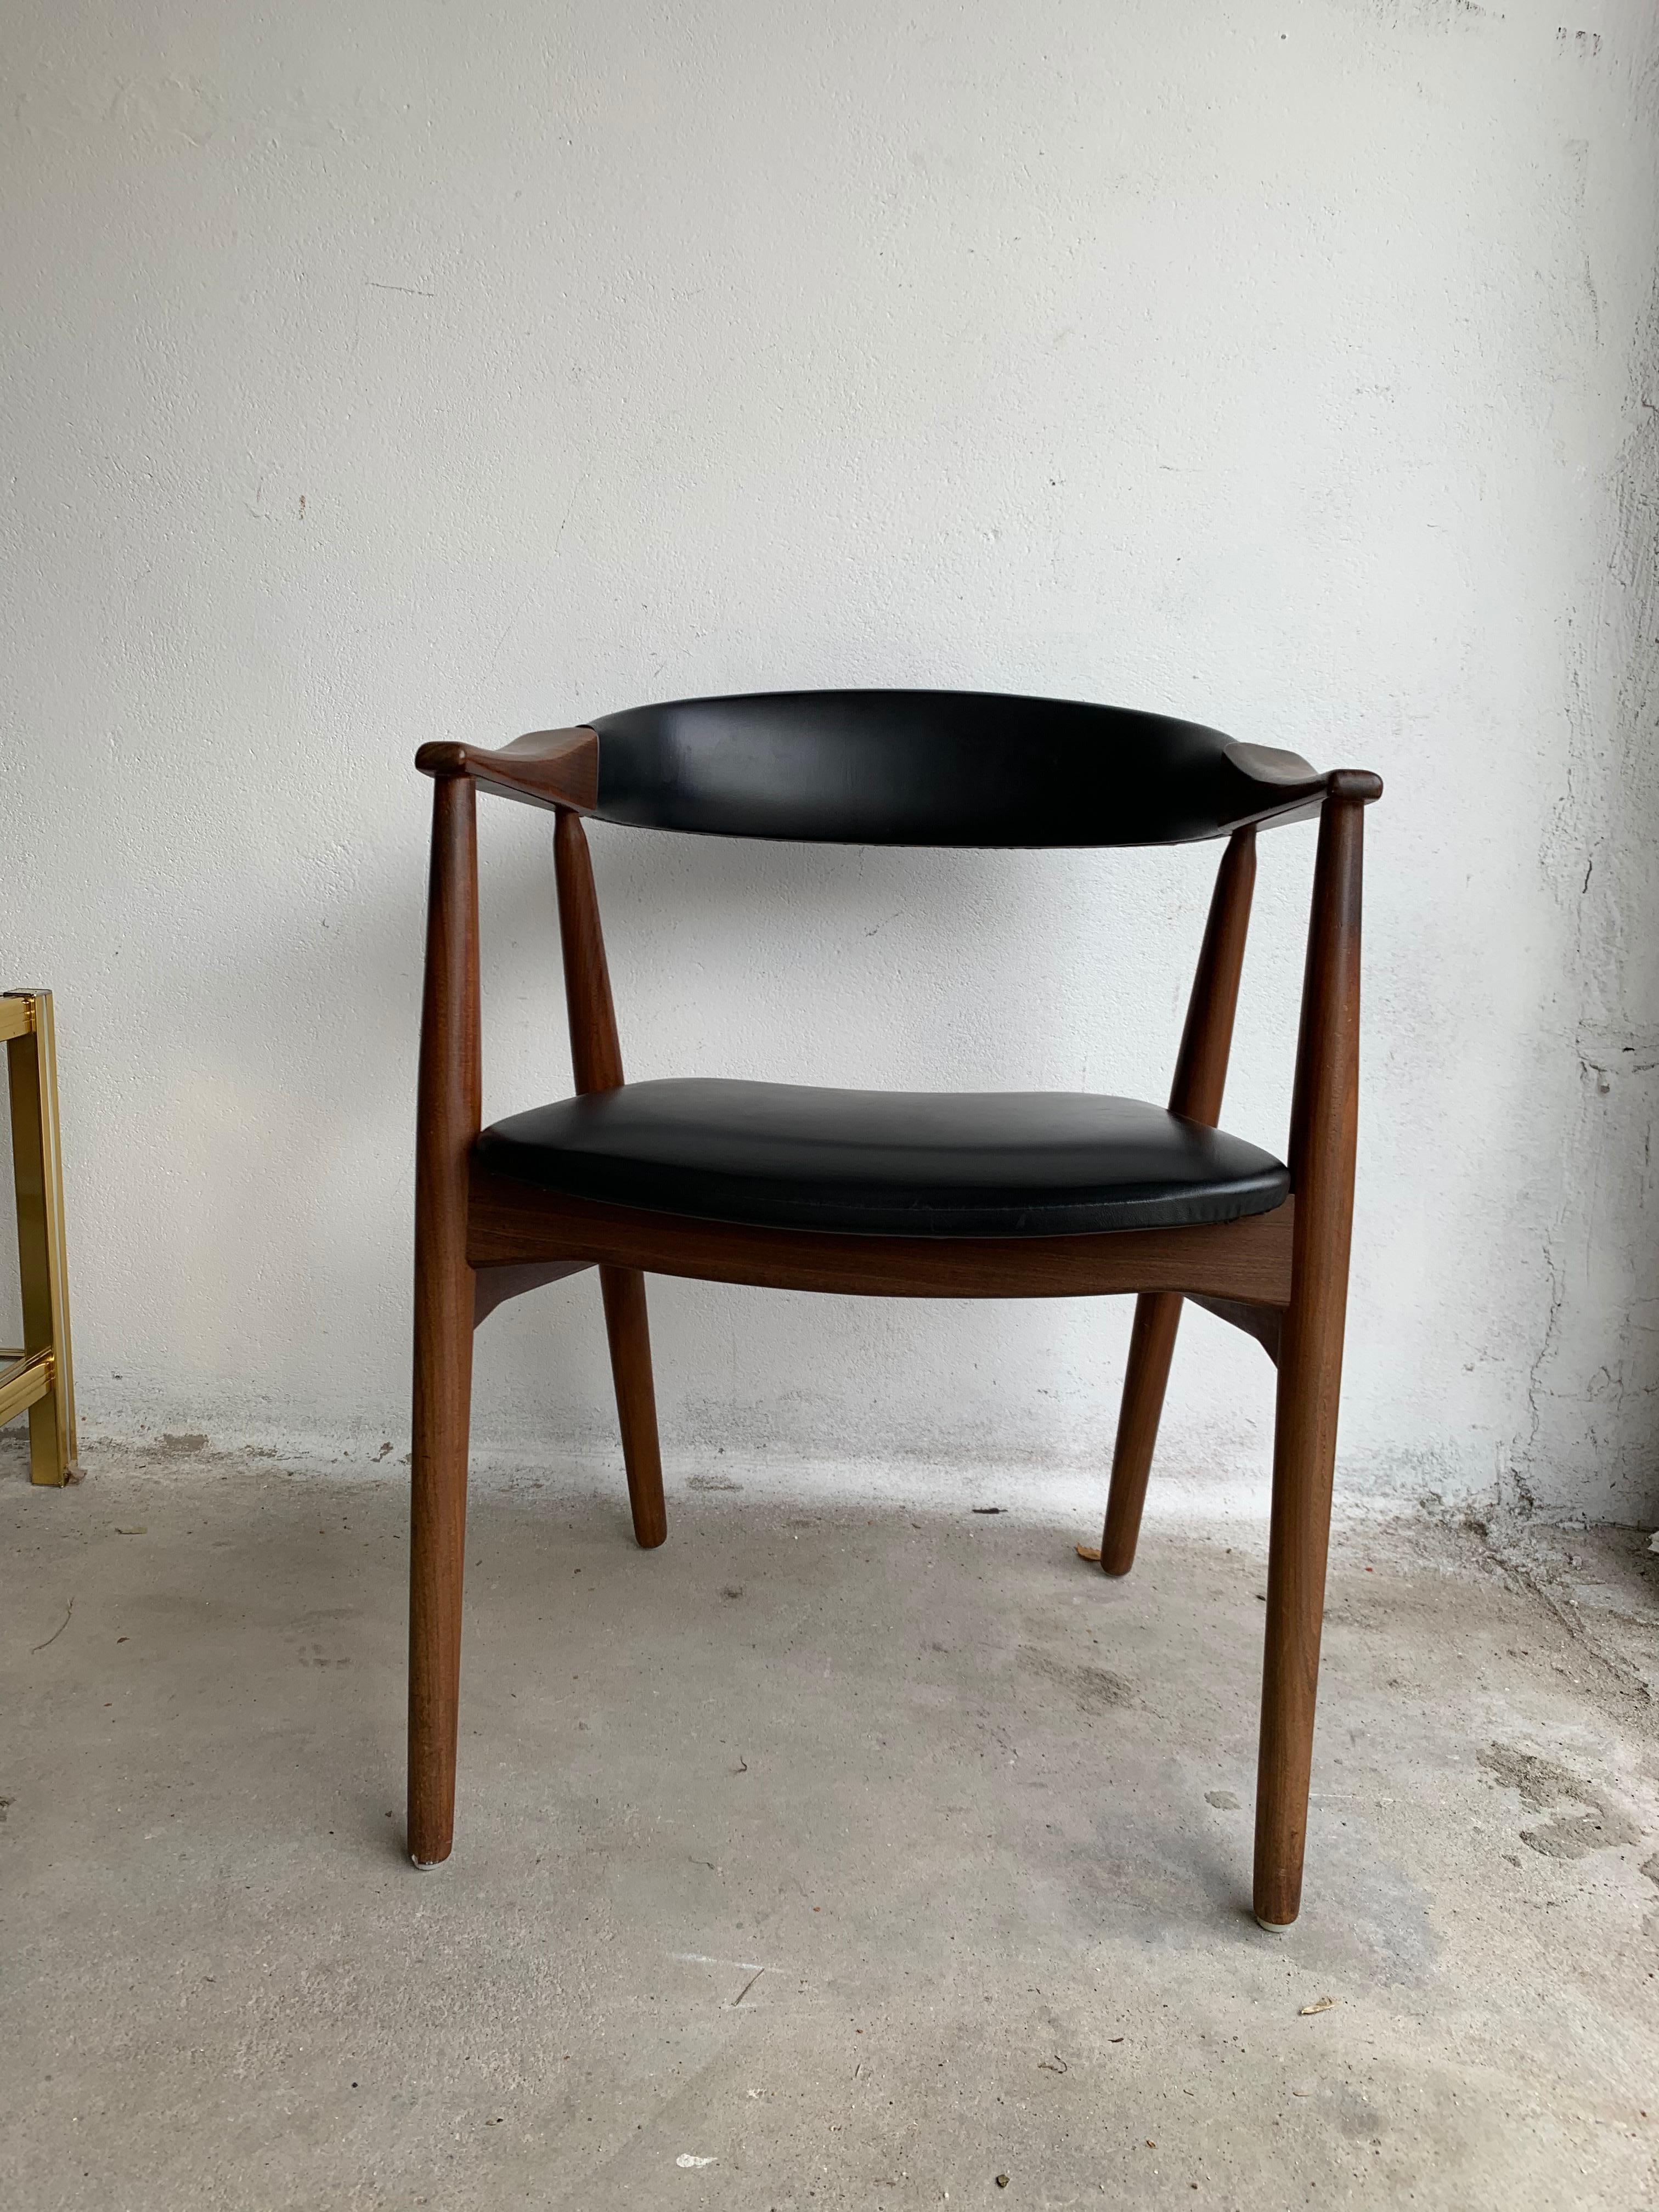 Vintage design of the late 1950s teak armchair designed by designer Thomas Harlev and produced by Danish Farstrup. Seat and back in black vinyl. In great vintage condition. This stylish chair from Thomas Harlev fits in both a sleek and modern like a